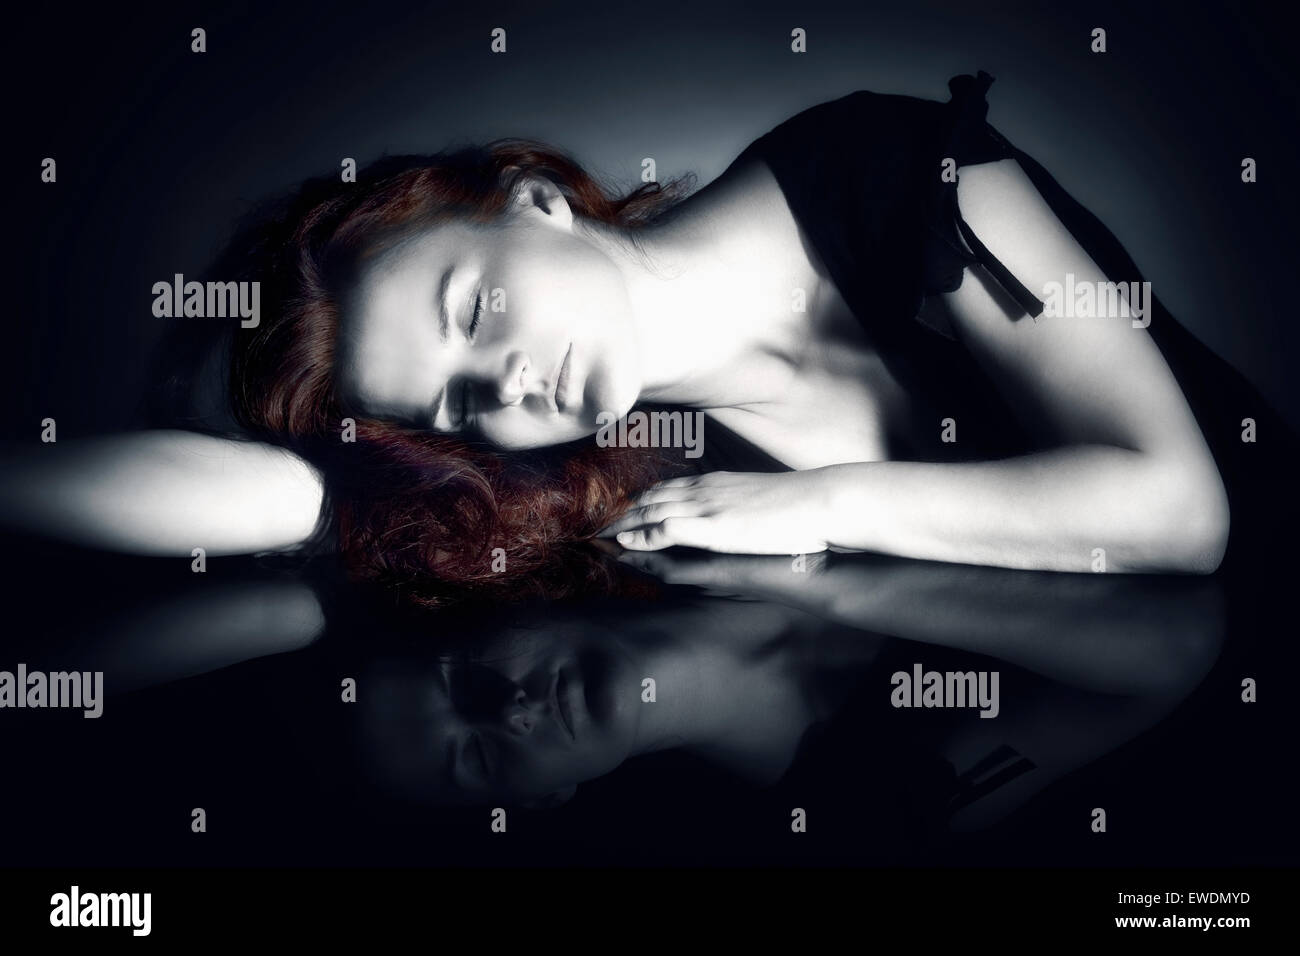 Romantic Image of a Woman with Closed Eyes Dreaming Stock Photo